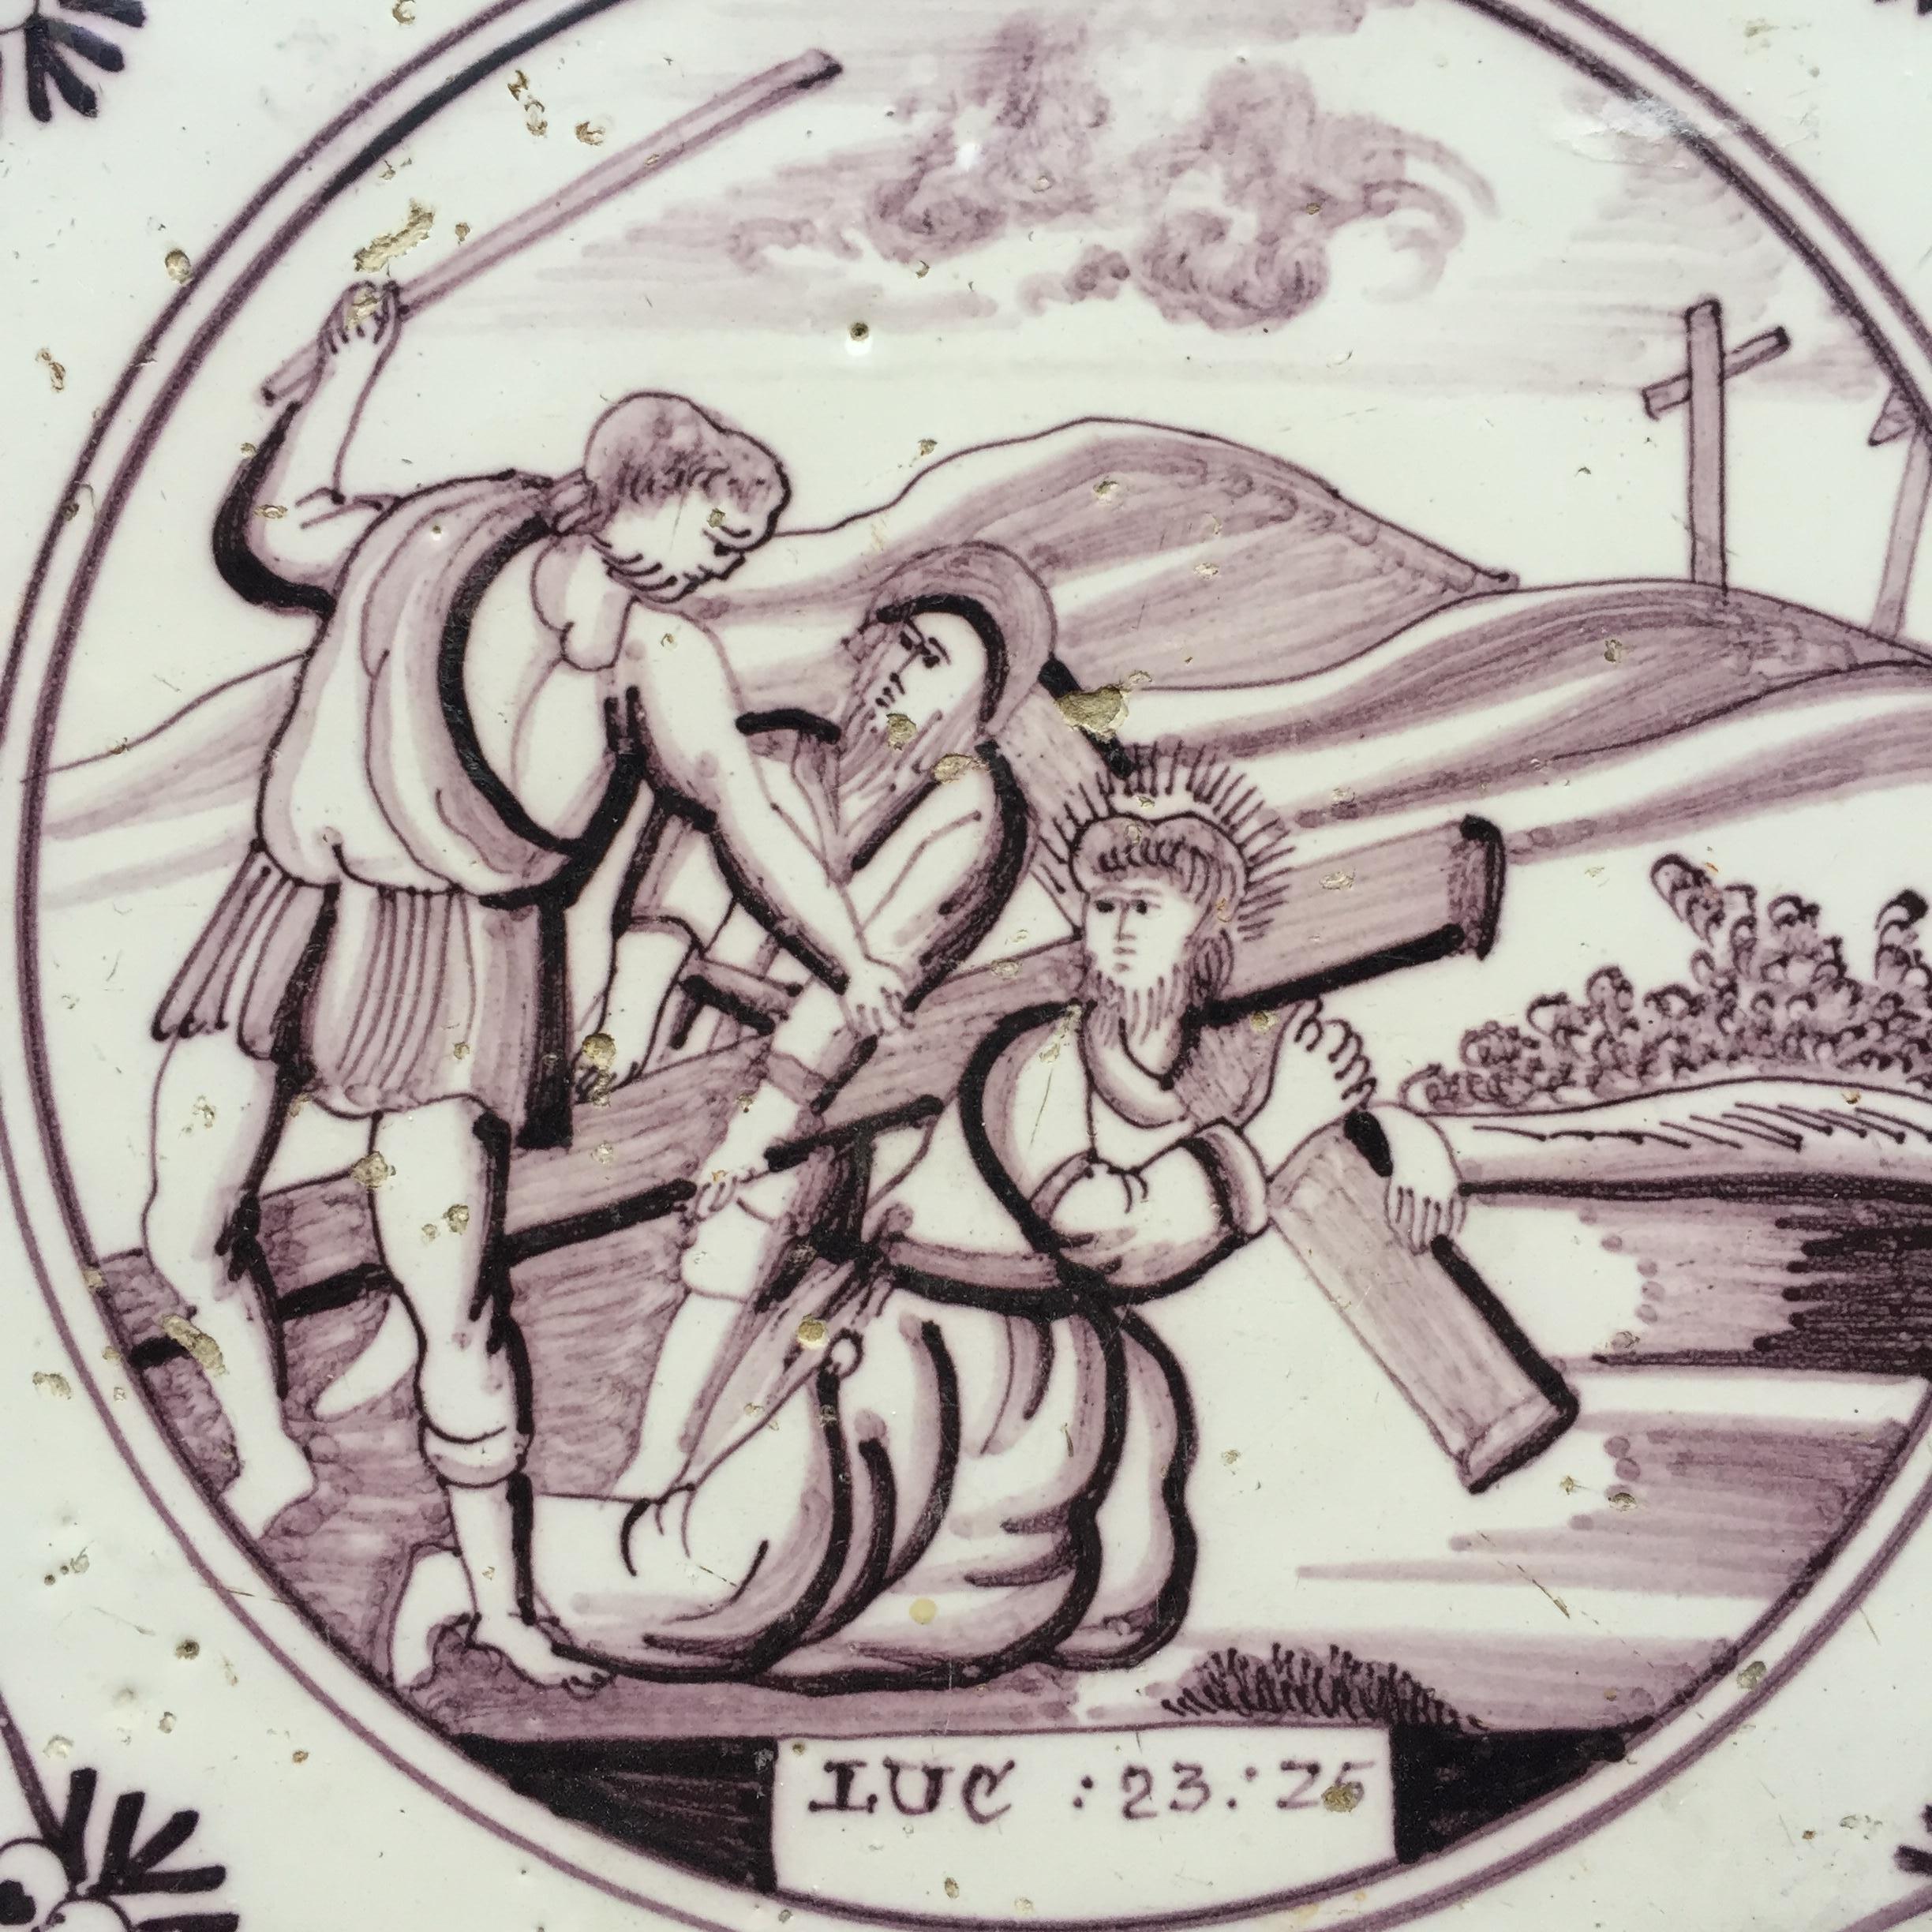 The Netherlands
Utrecht
Circa 1775 – 1800

A fine manganese Dutch tile with a New Testament biblical decoration of the Carrying of the Cross, Luke 23 v 25: ”As the soldiers led him away, they seized Simon from Cyrene, who was on his way in from the